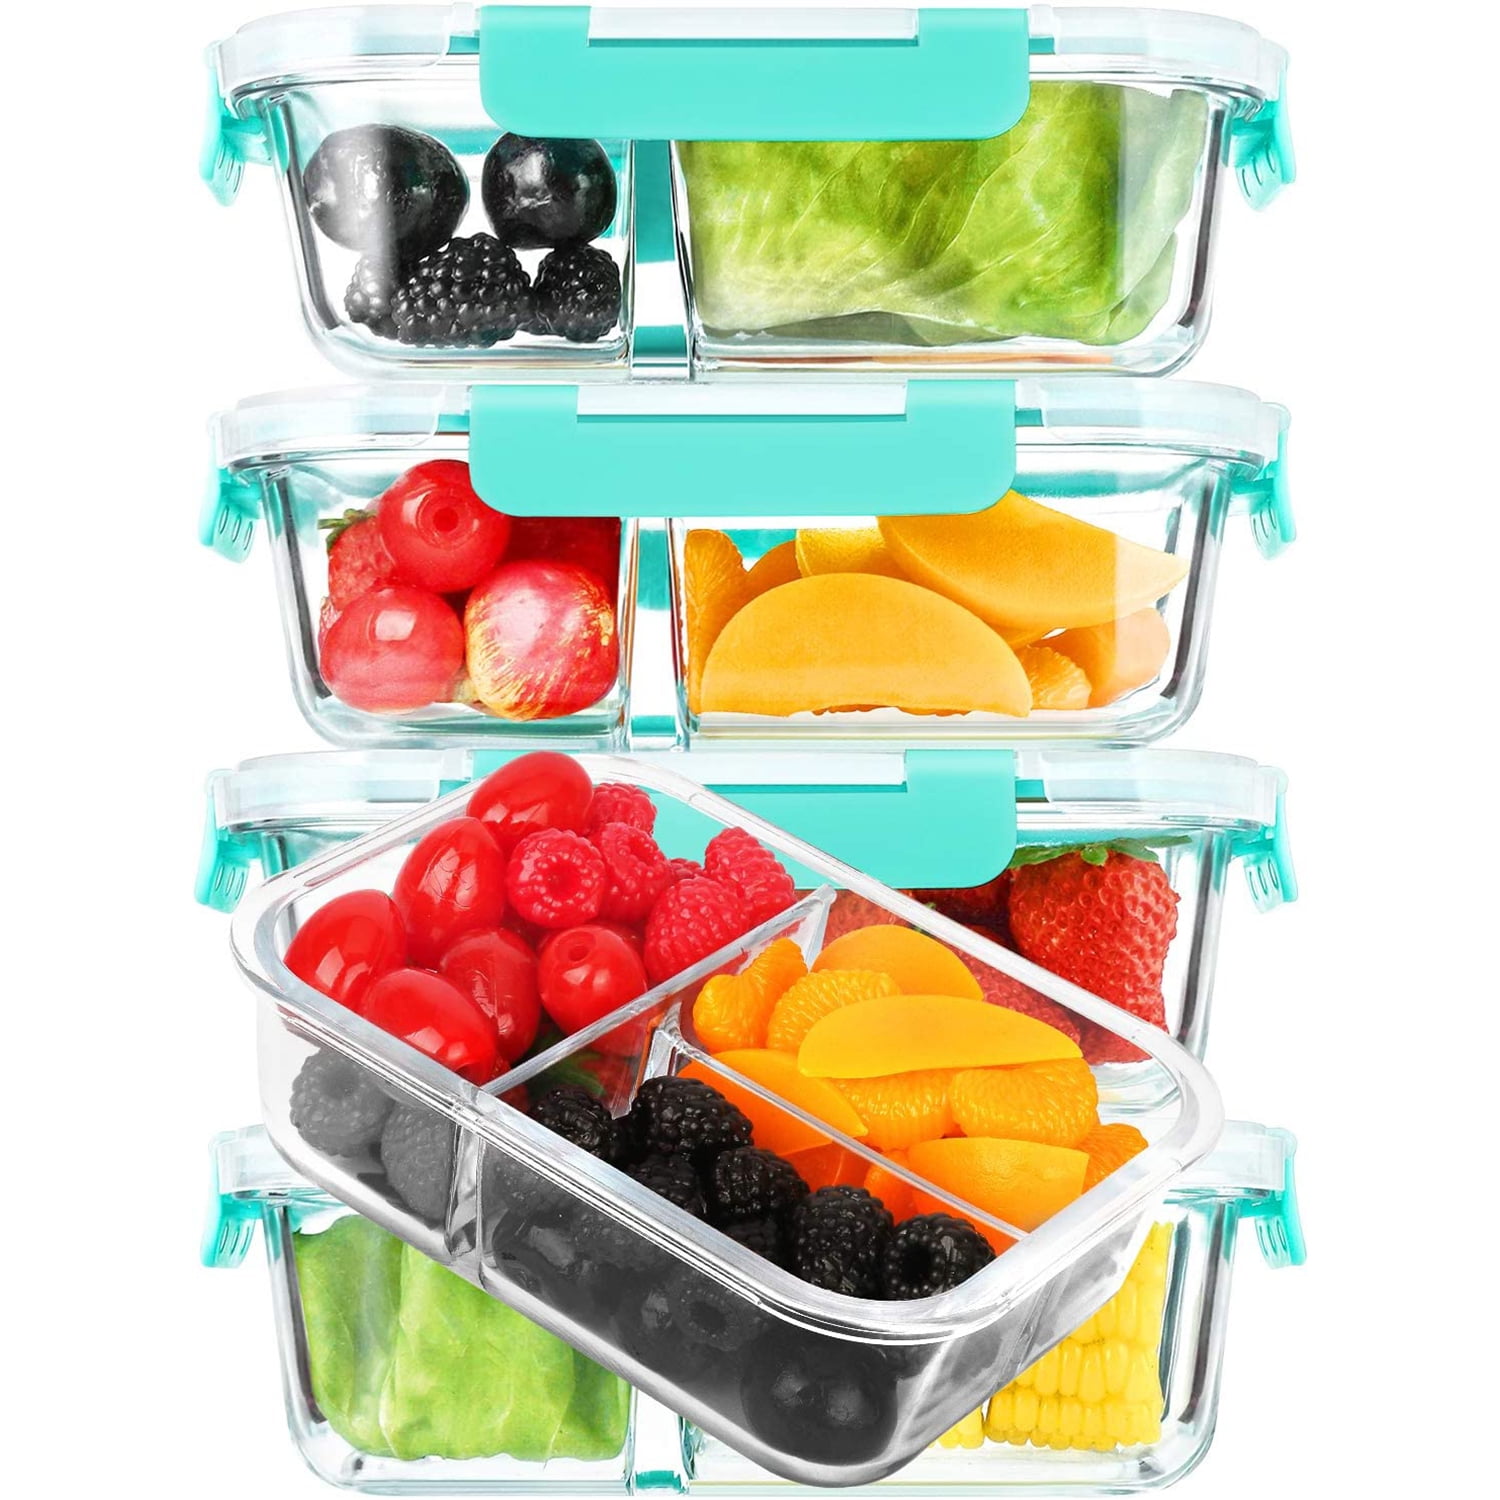 5-Pack, 36 oz] Glass Meal Prep Containers 3 Compartment with Lids